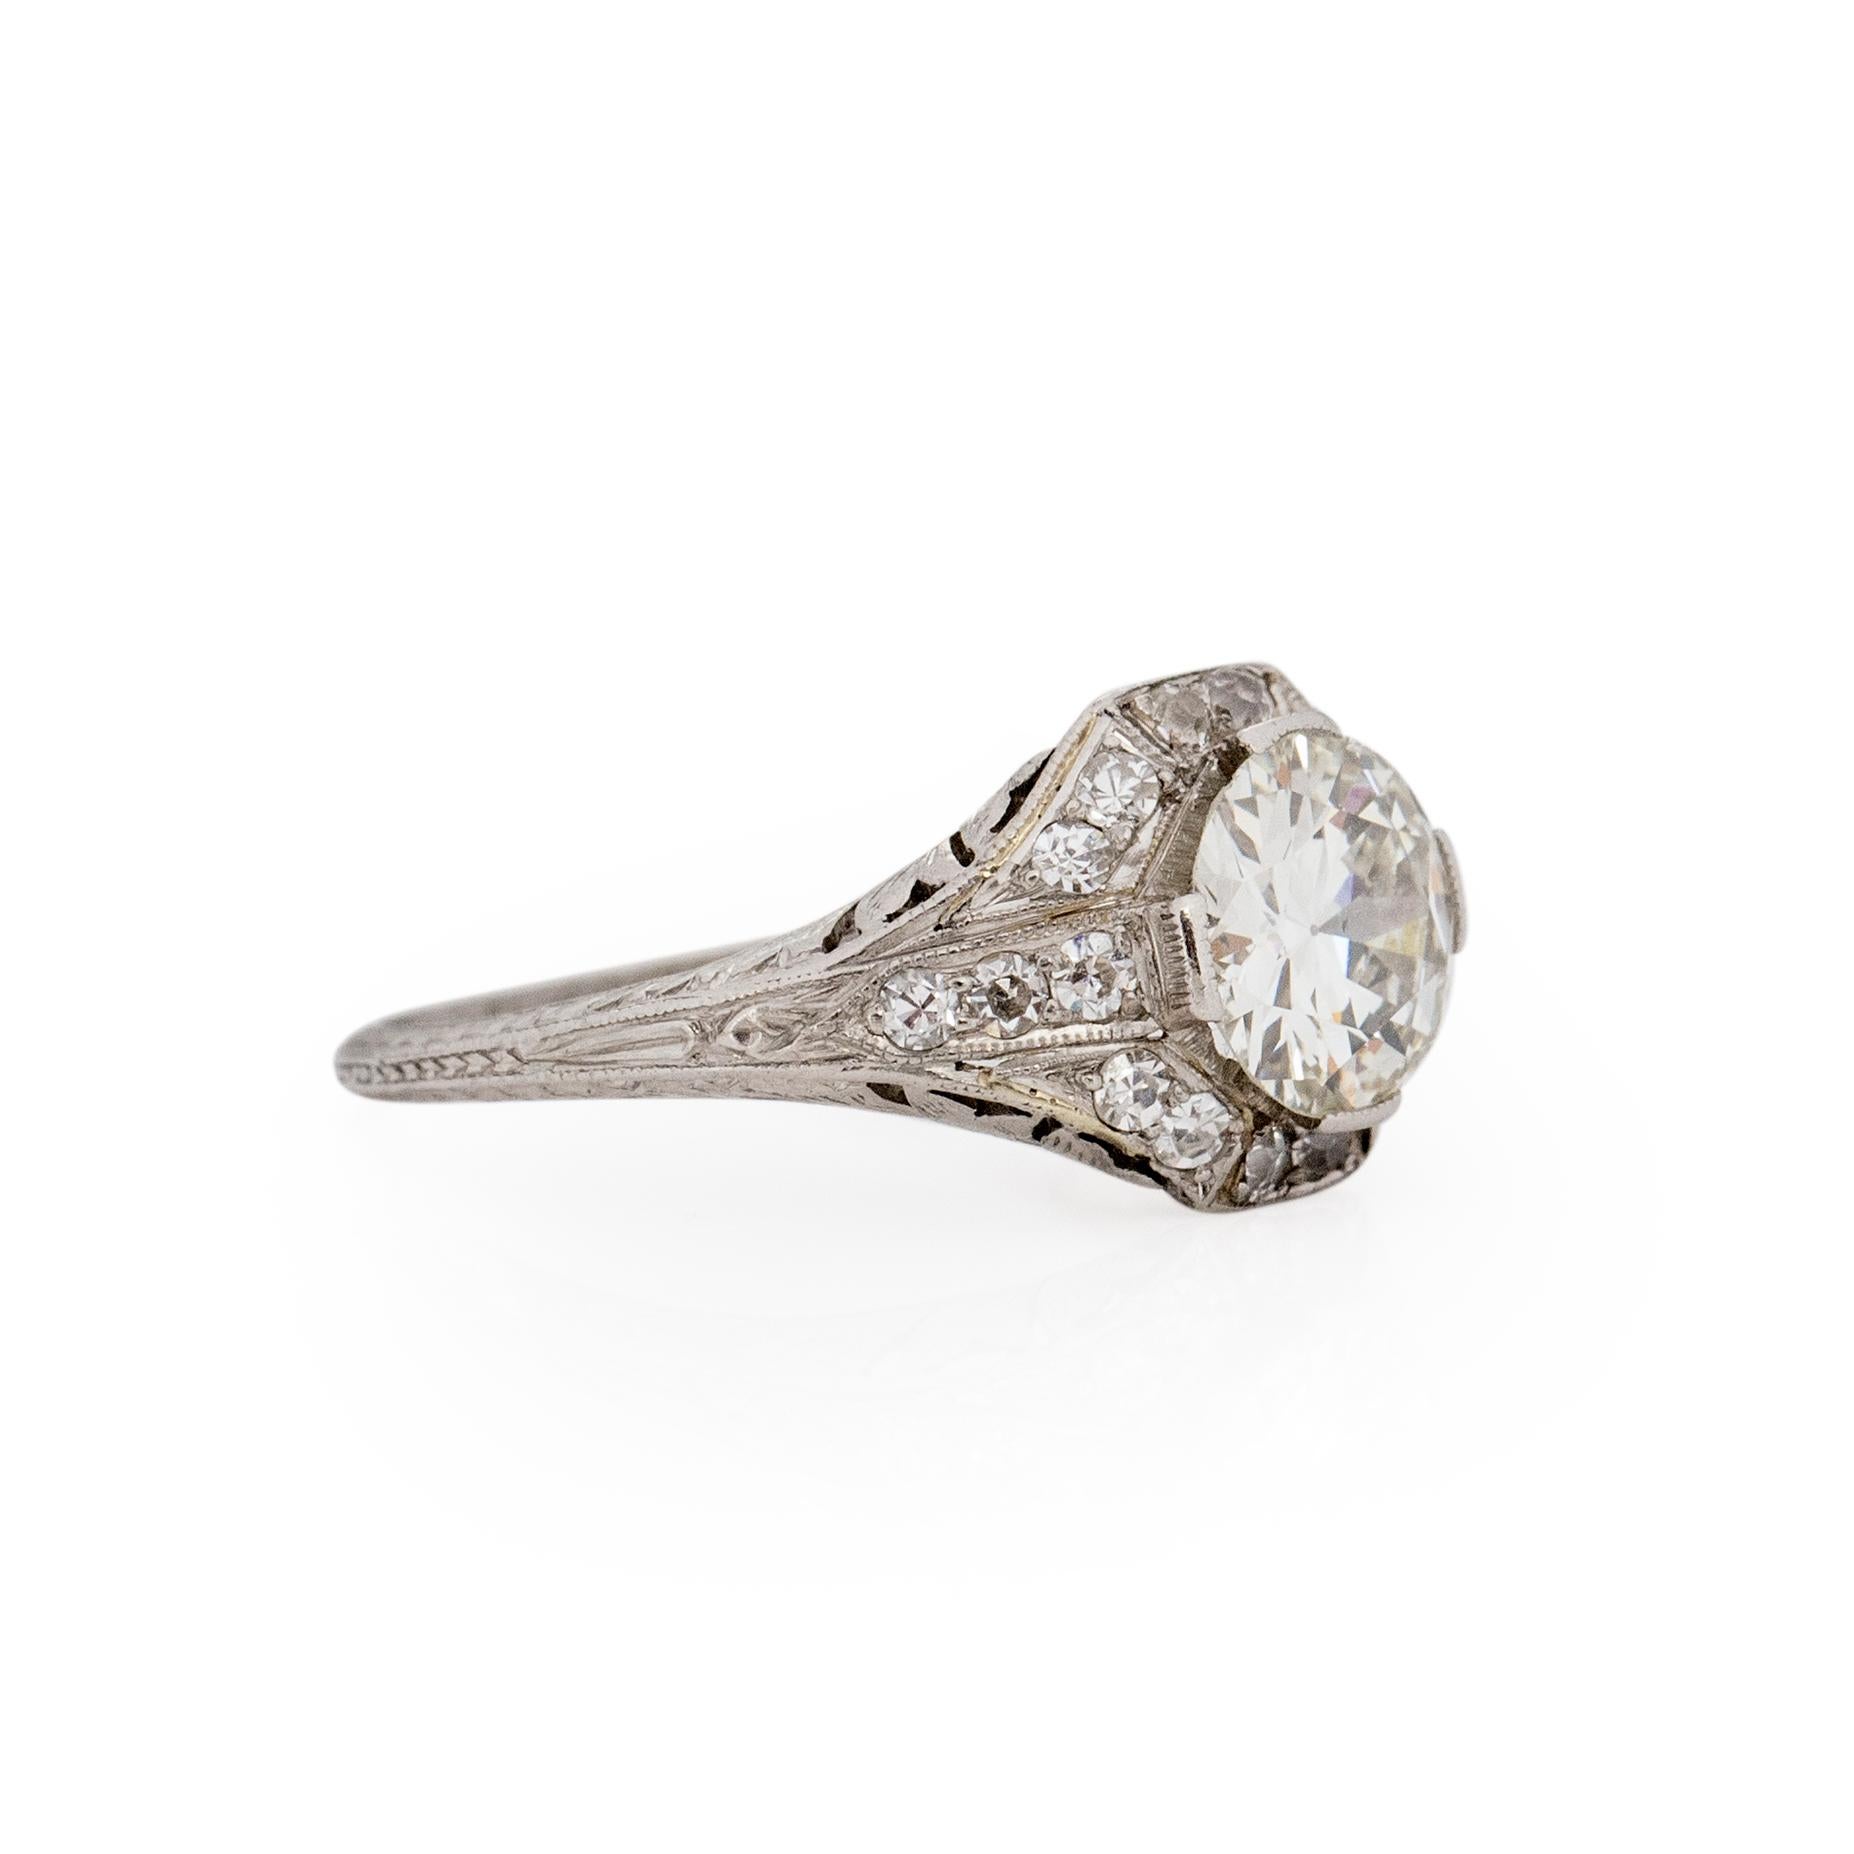 There we have a breath taking art deco piece. Rings with this diamond size and in this condition are getting harder and harder to come by. Set in platinum, the center 1.55 Ct old European cut diamond has facets that catch the light at every flick of